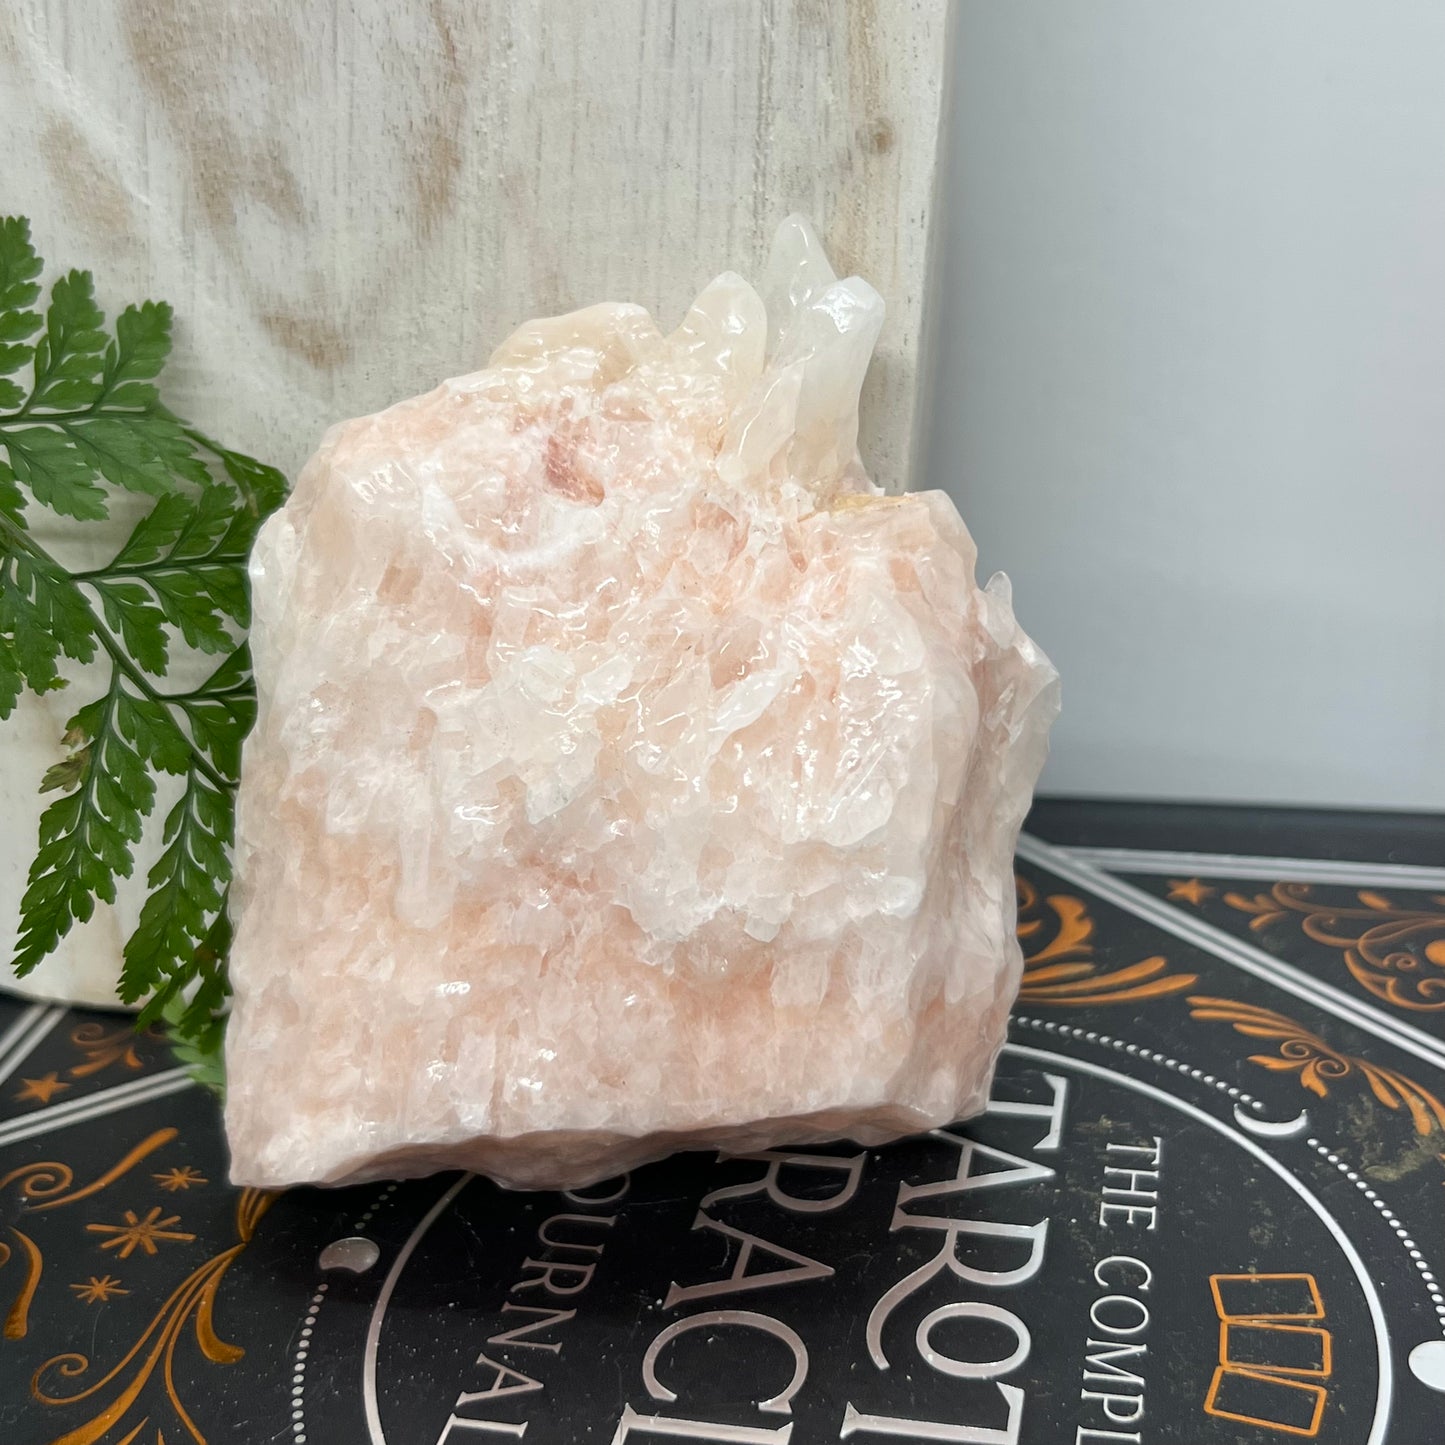 Pink Calcite Crystal - Large Rough Pale Pink Calcite Crystal Chunk